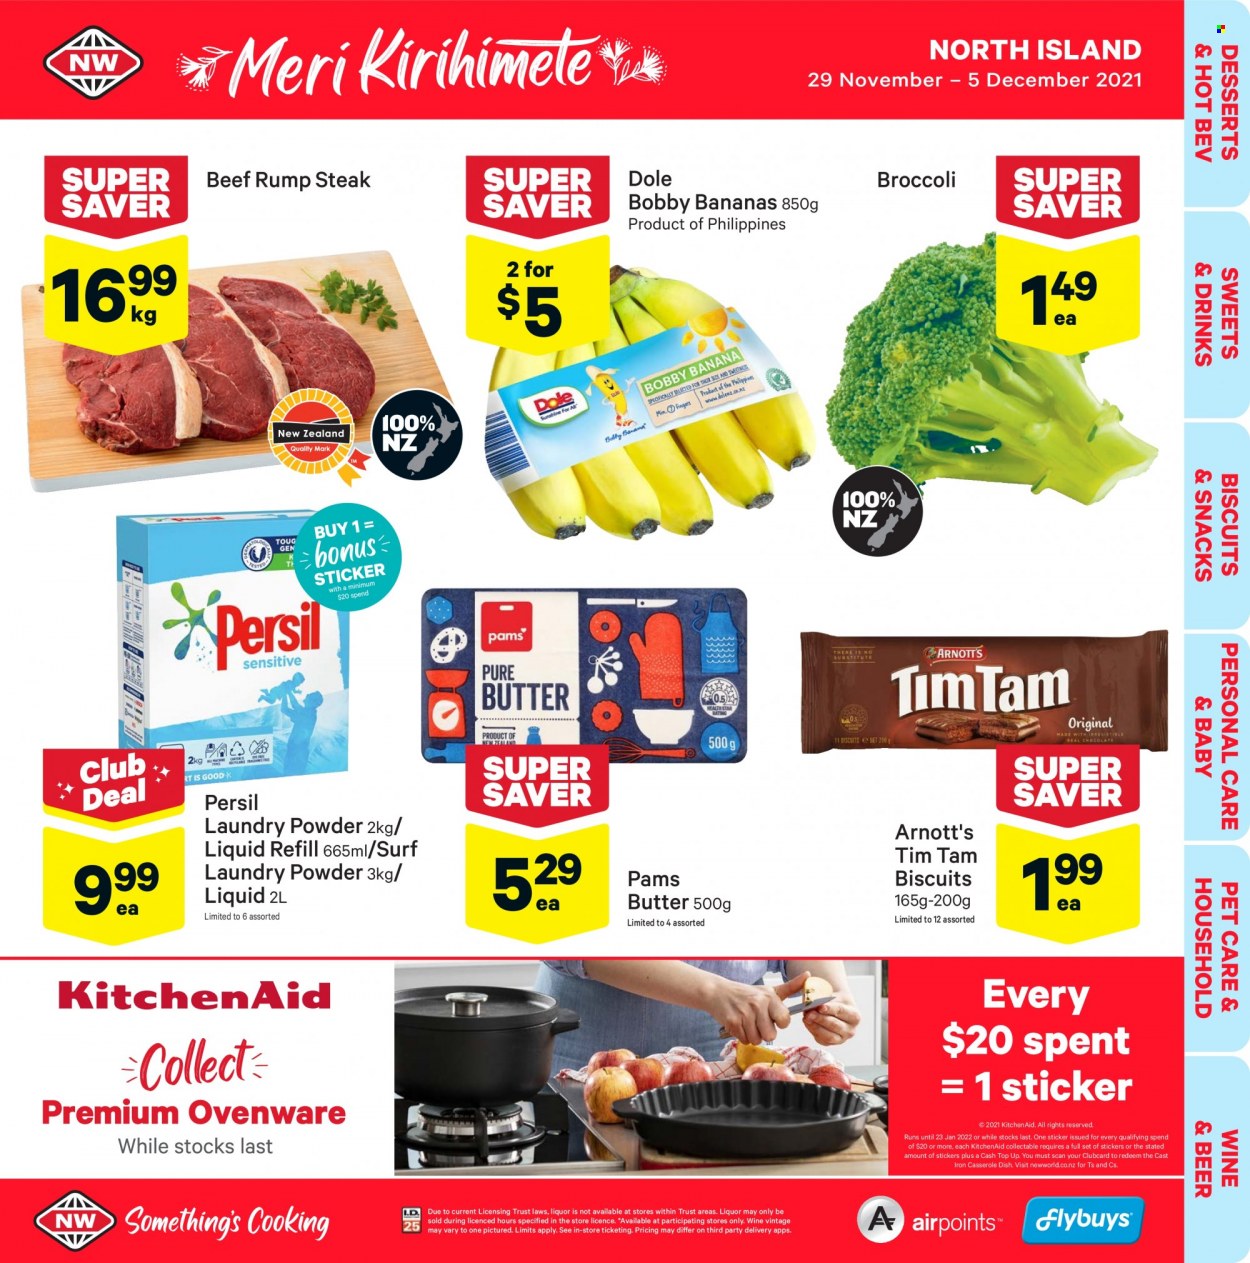 thumbnail - New World mailer - 29.11.2021 - 05.12.2021 - Sales products - broccoli, Dole, bananas, butter, snack, Tim Tam, biscuit, wine, beer, beef meat, steak, rump steak, Persil, laundry powder, Surf, KitchenAid, casserole, sticker. Page 1.